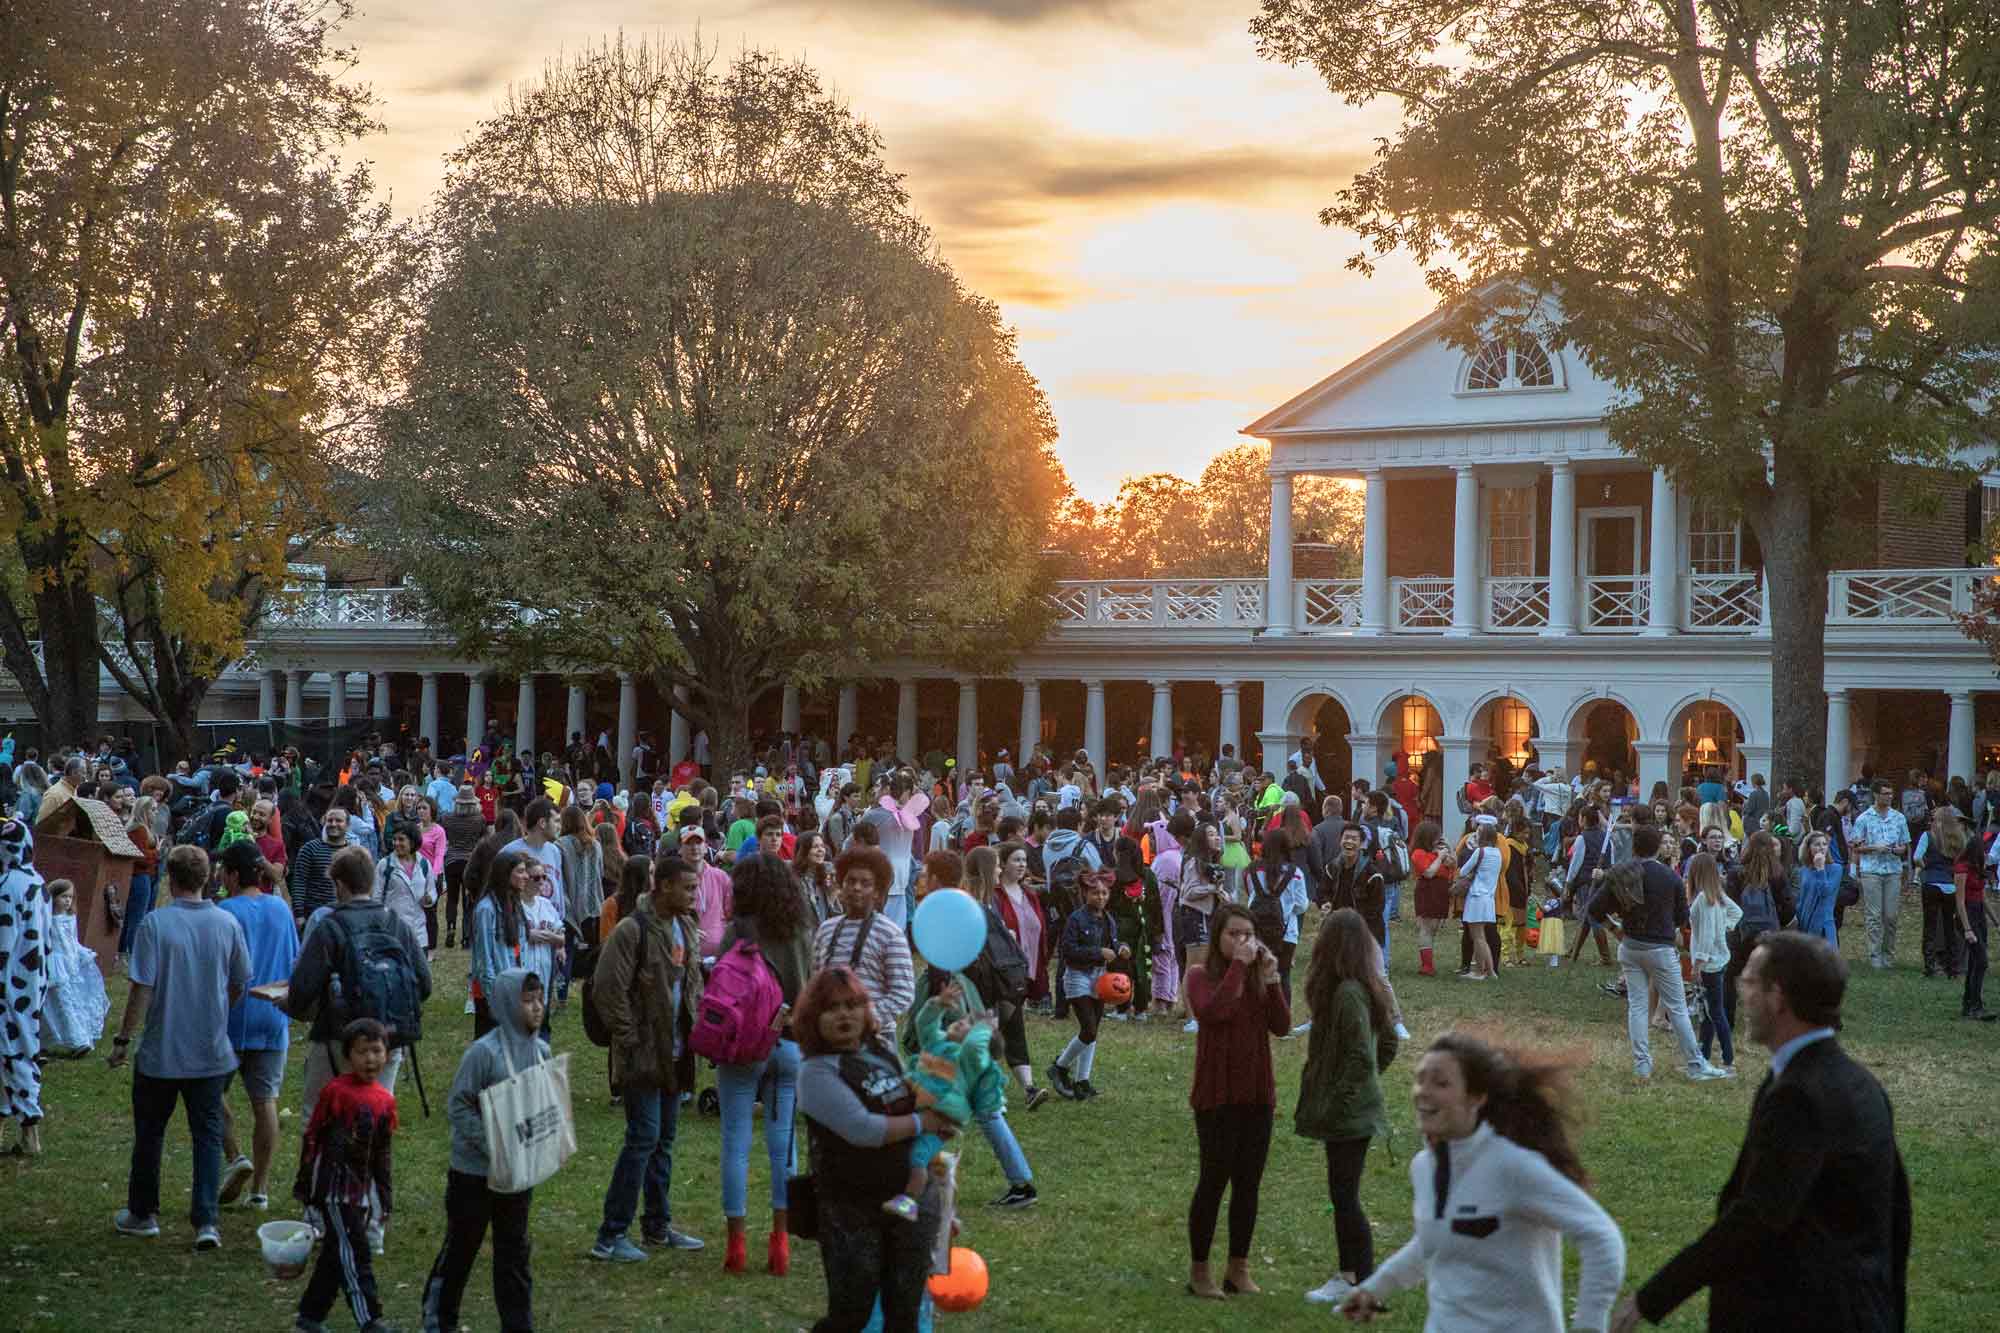 At sunset, the UVA lawn is filled with adults and children dressed in costumes